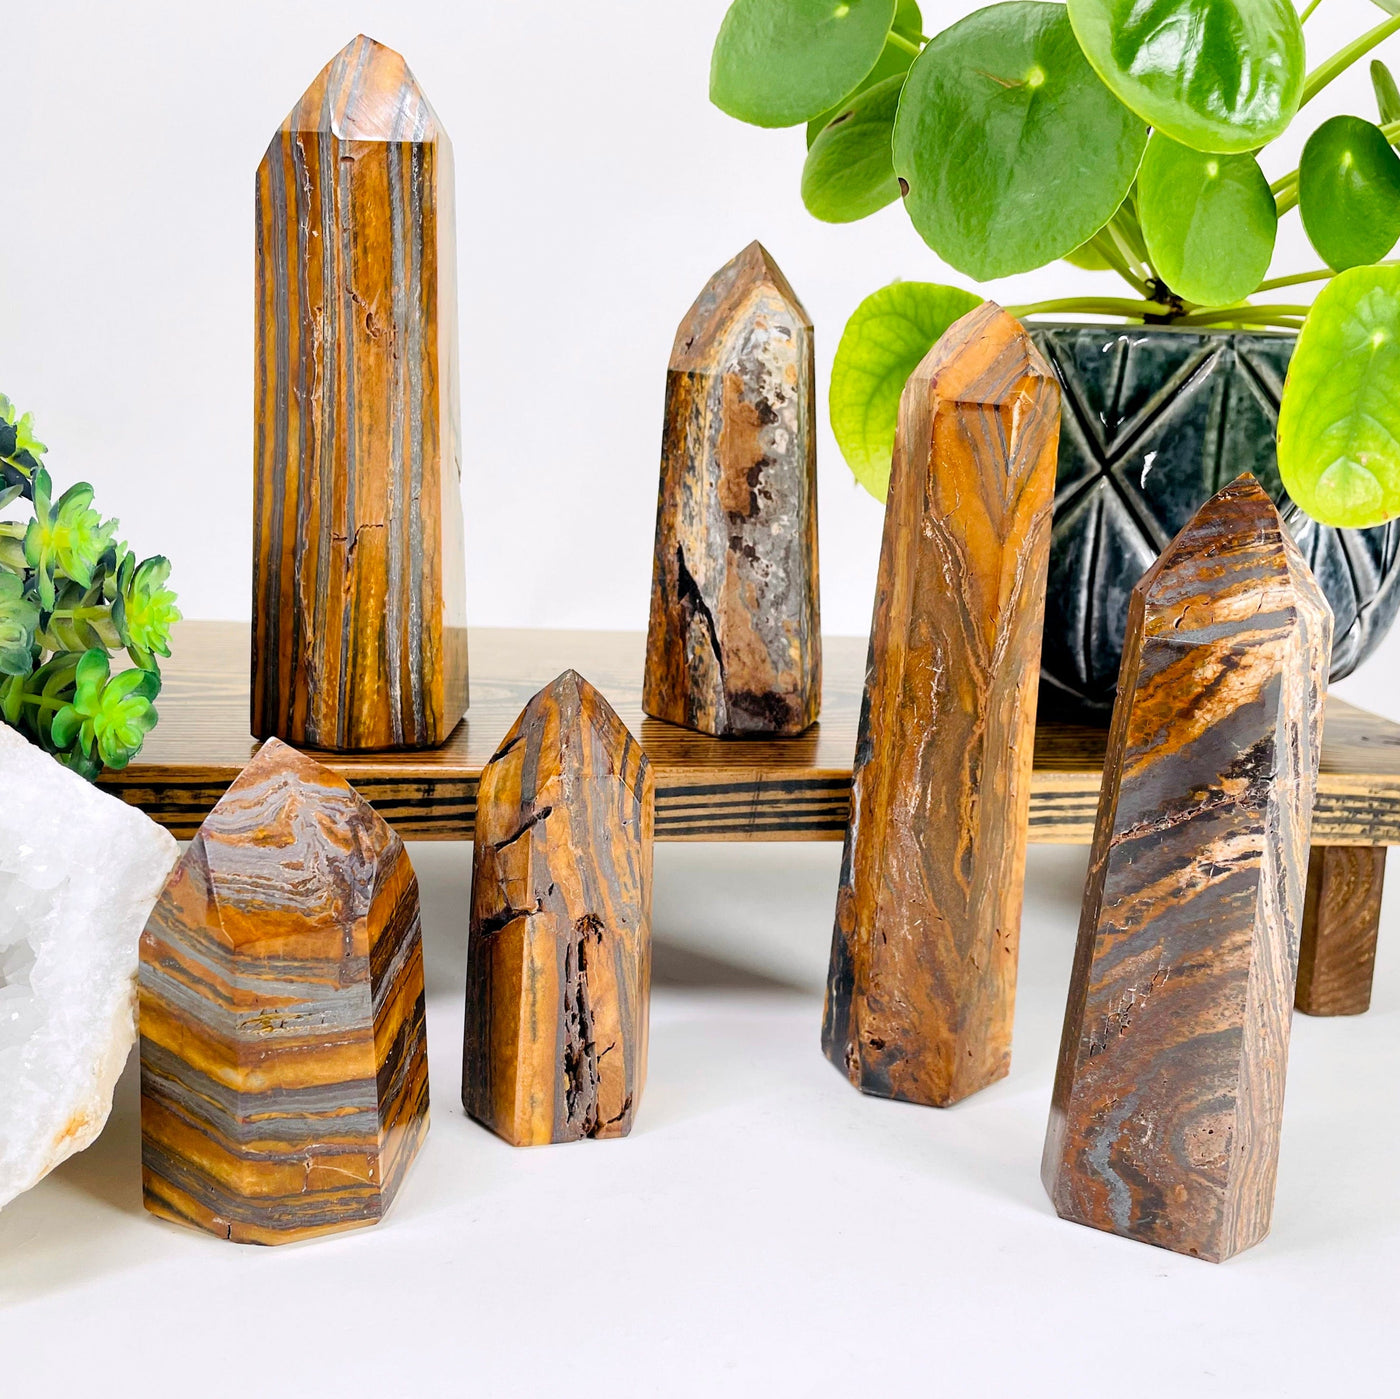 many different tiger eye polished point weights on display